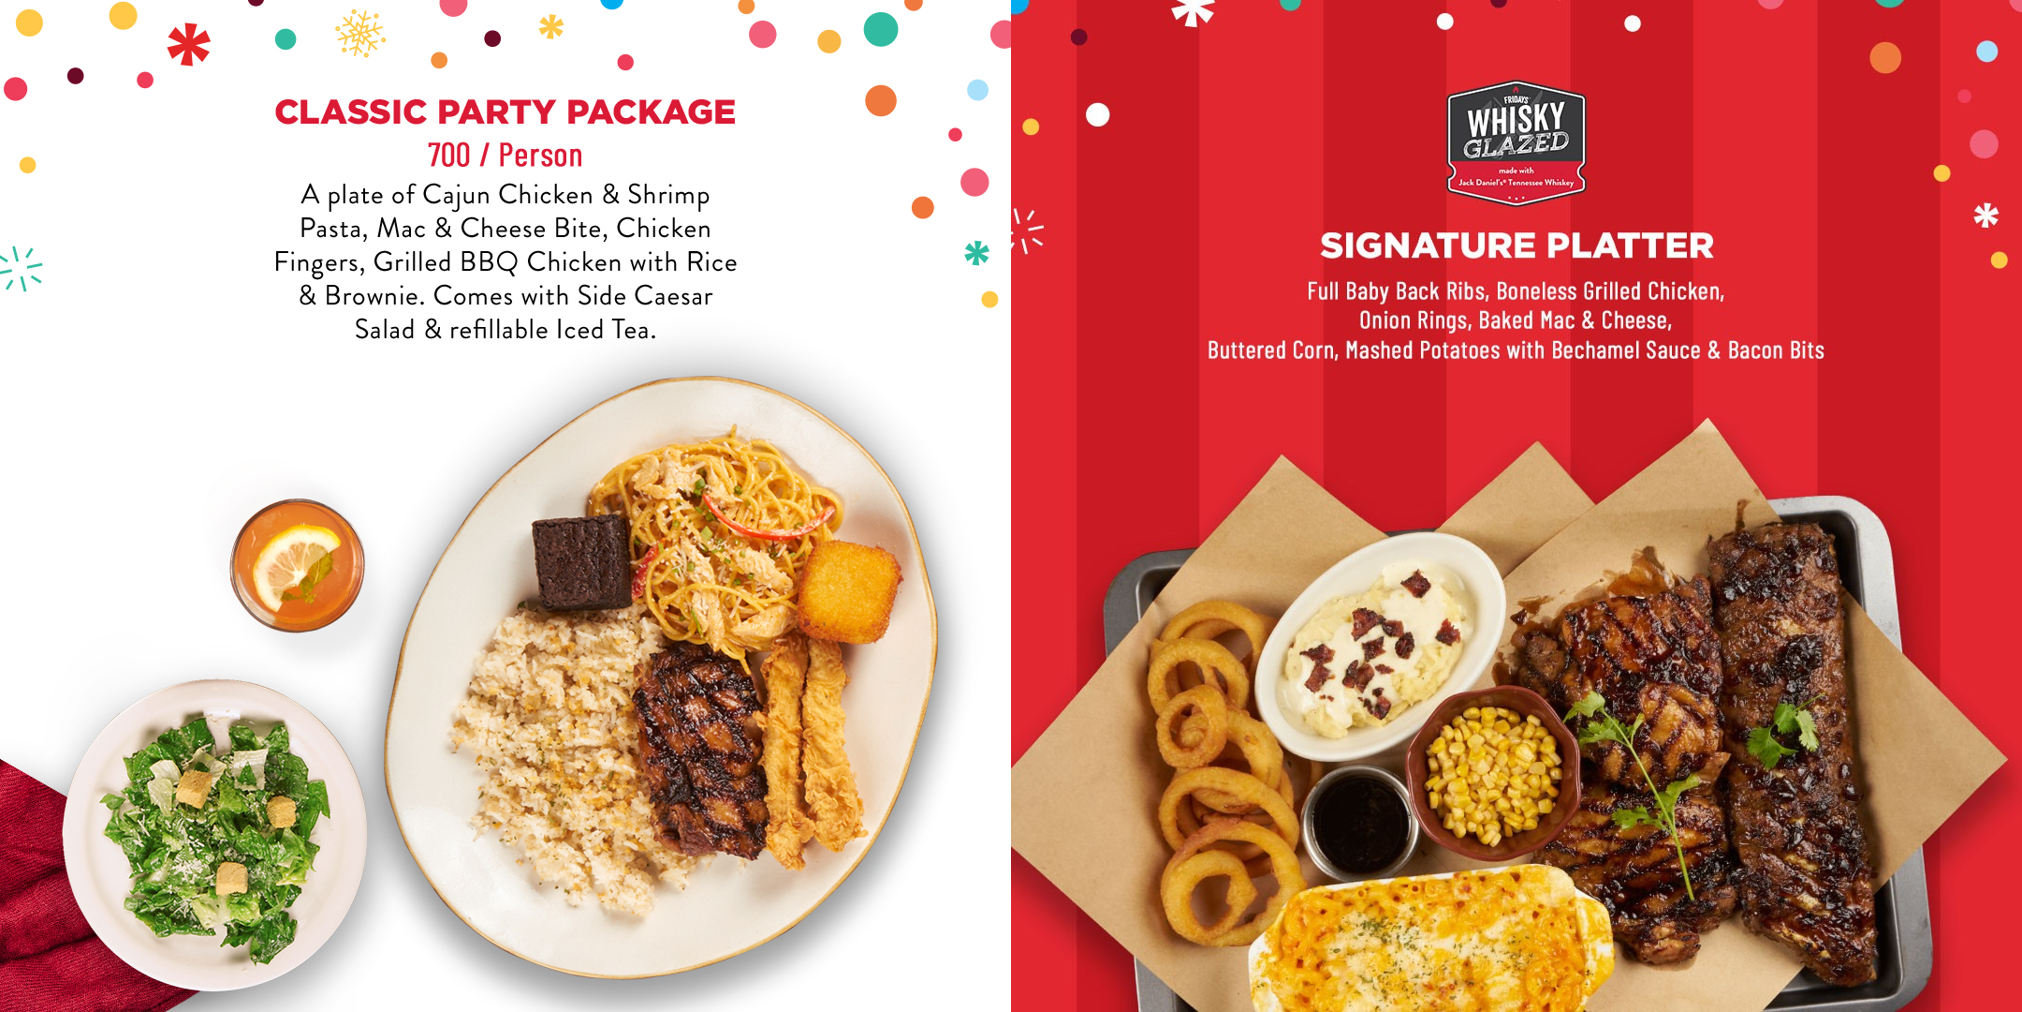 Festive Christmas party packages now available at TGIFridays